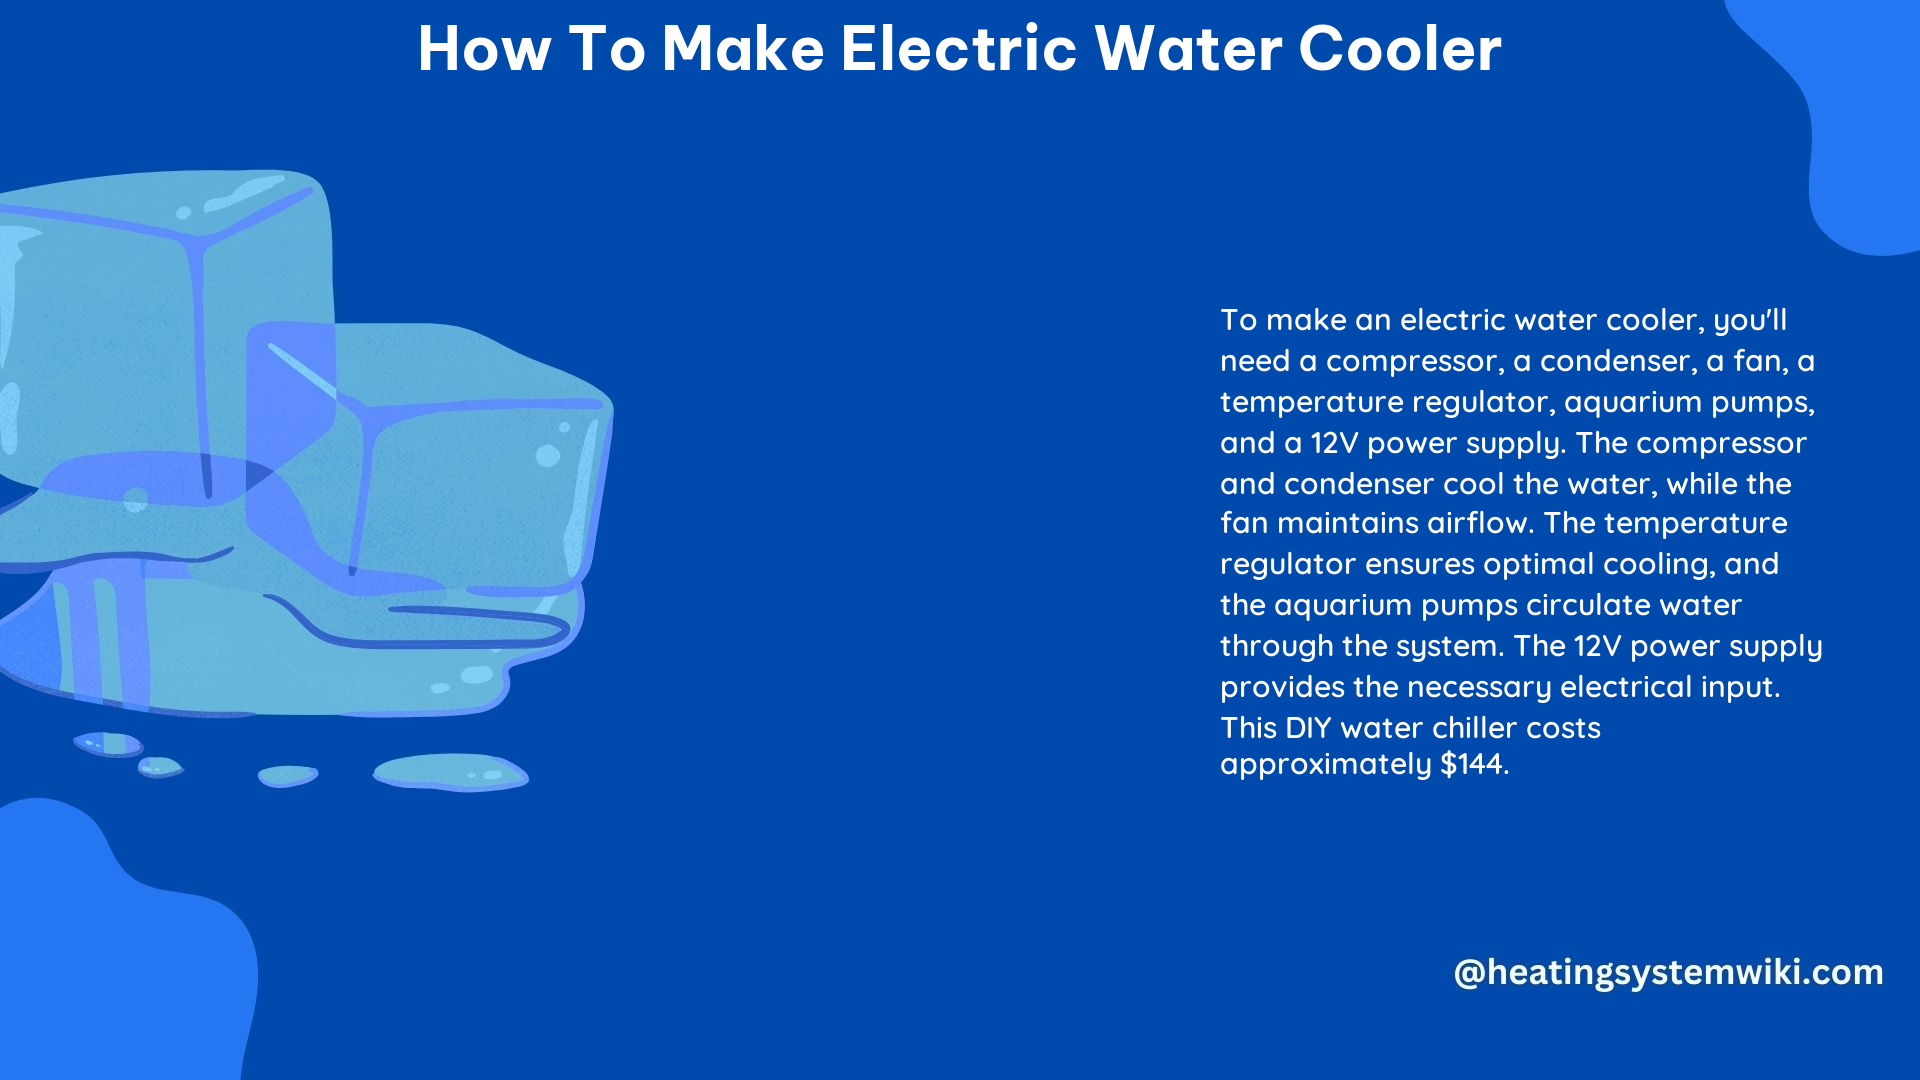 How to Make Electric Water Cooler